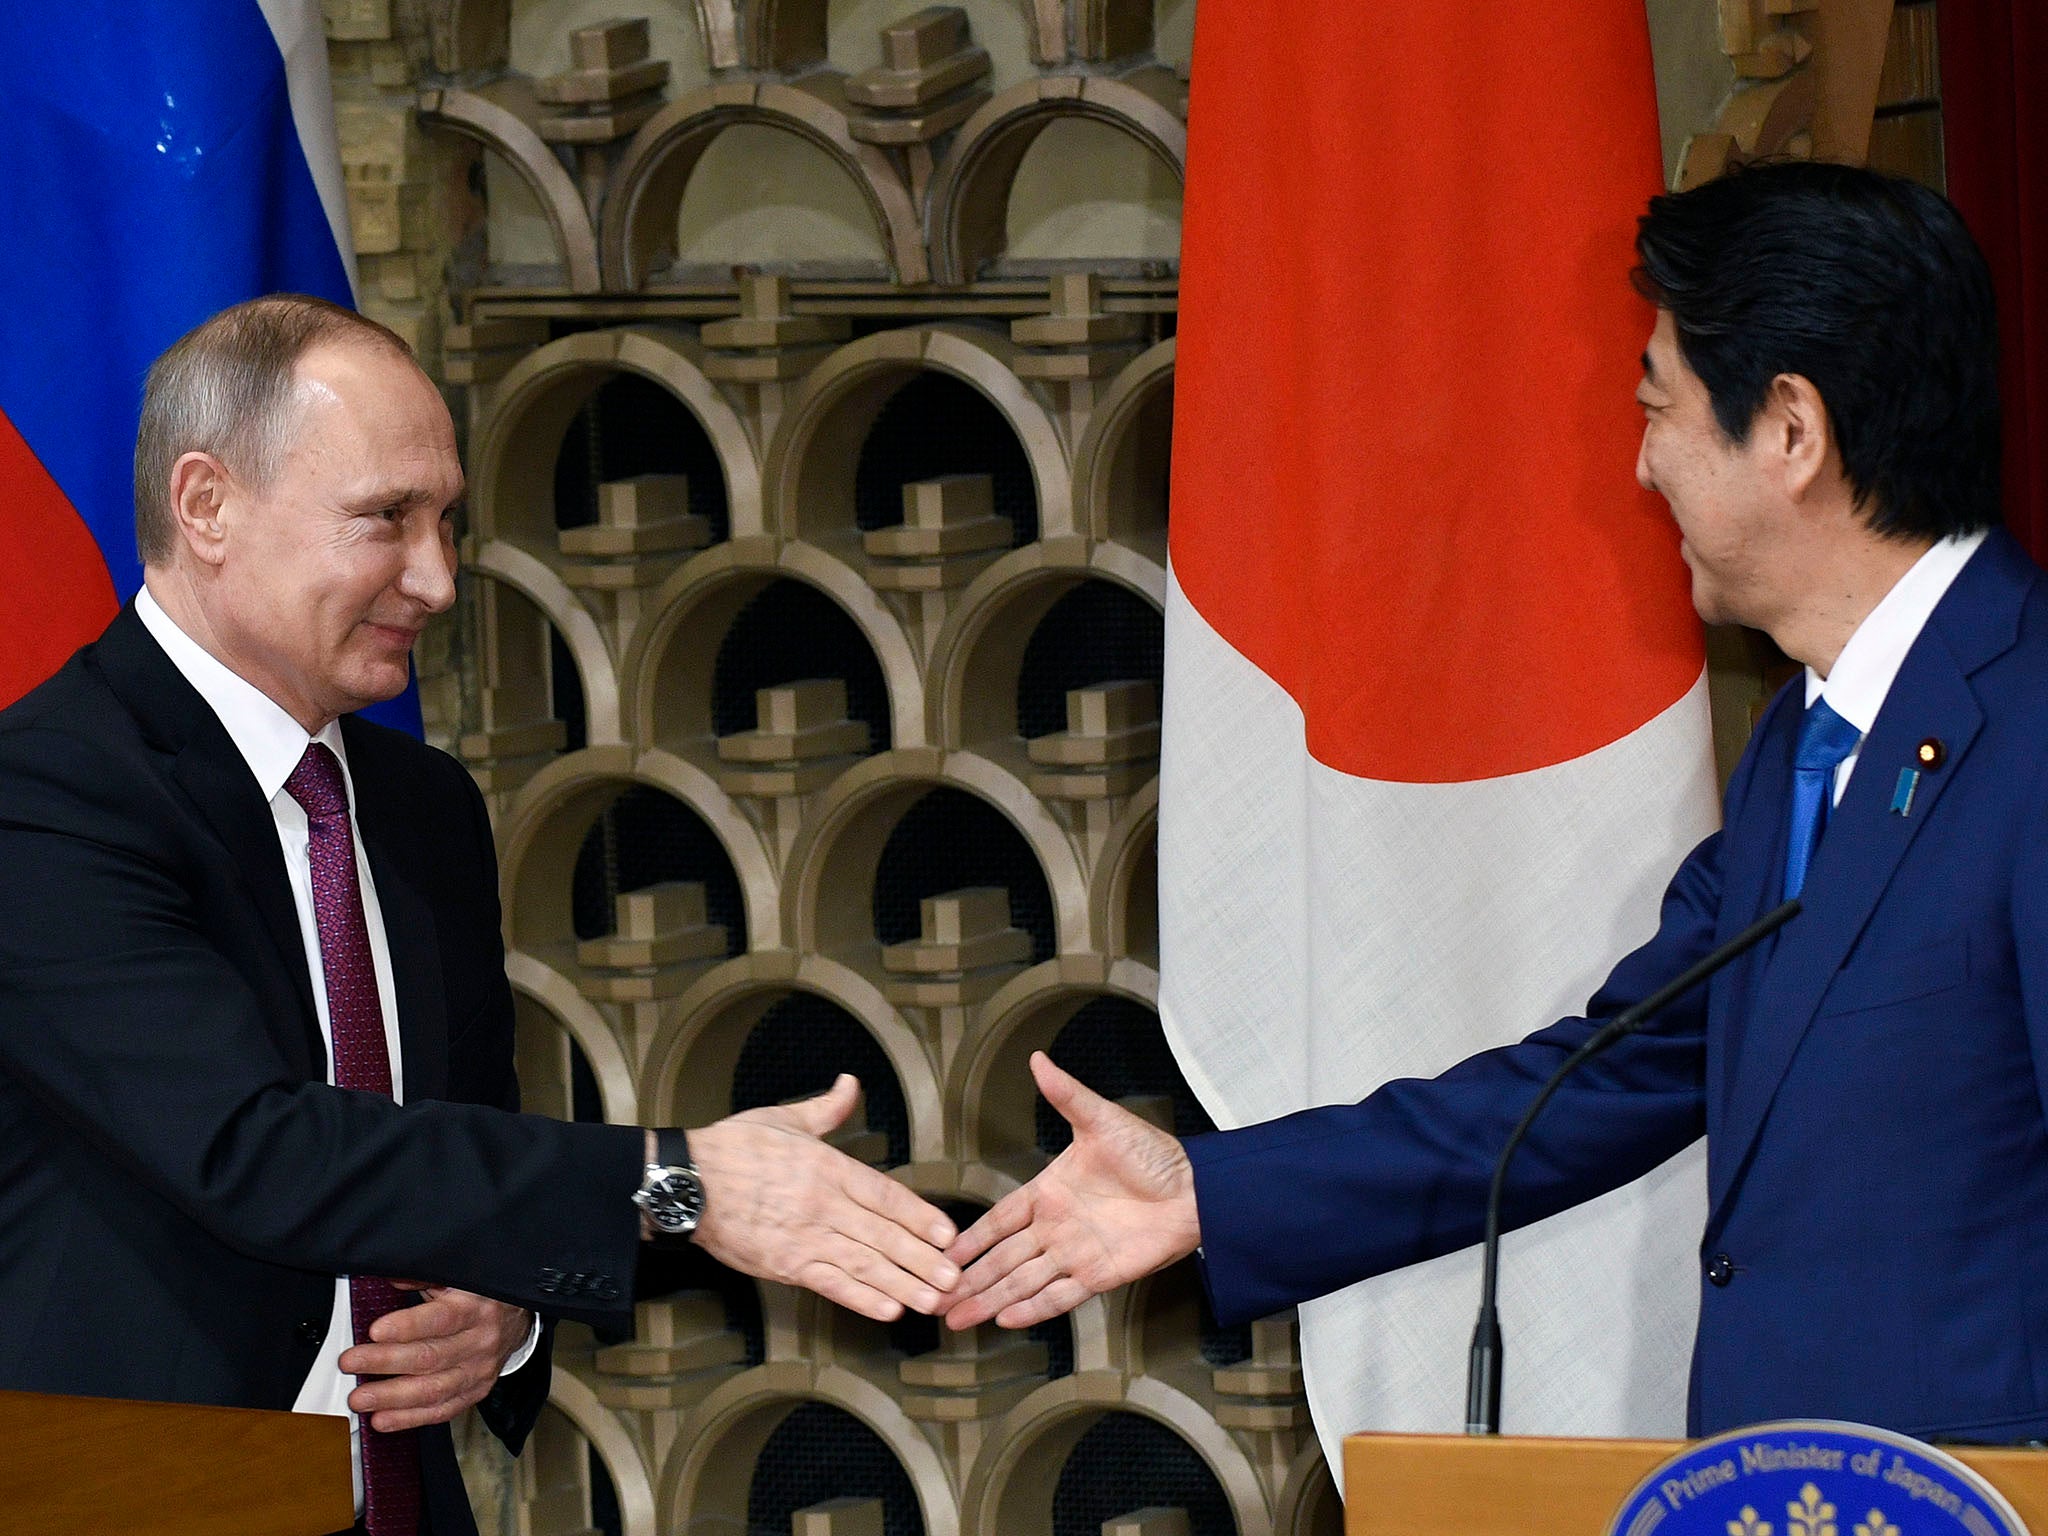 Russia wants to attract Japanese investment to its far east, while Japan hopes to solve a long-standing territorial stalemate